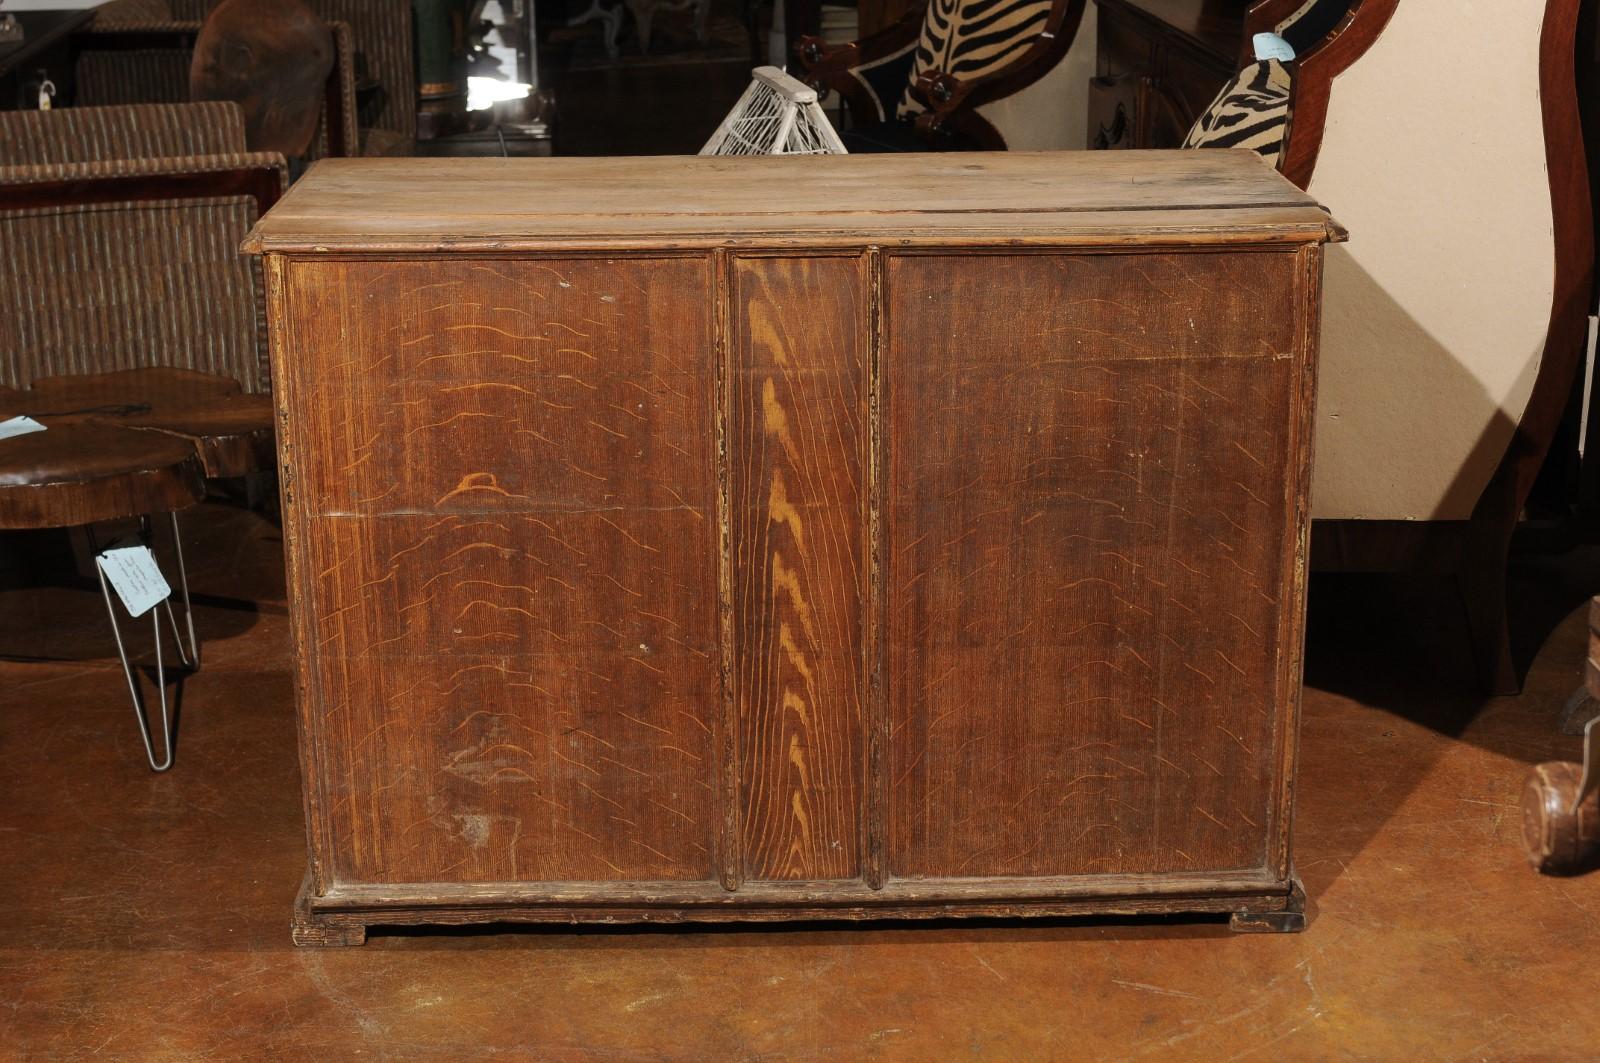 A French rustic tall shopkeeper's chest from the 19th century, with 10 drawers. Born in France during the 19th century, this handsome shopkeeper's chest features a rectangular planked top with nicely weathered appearance, sitting above a